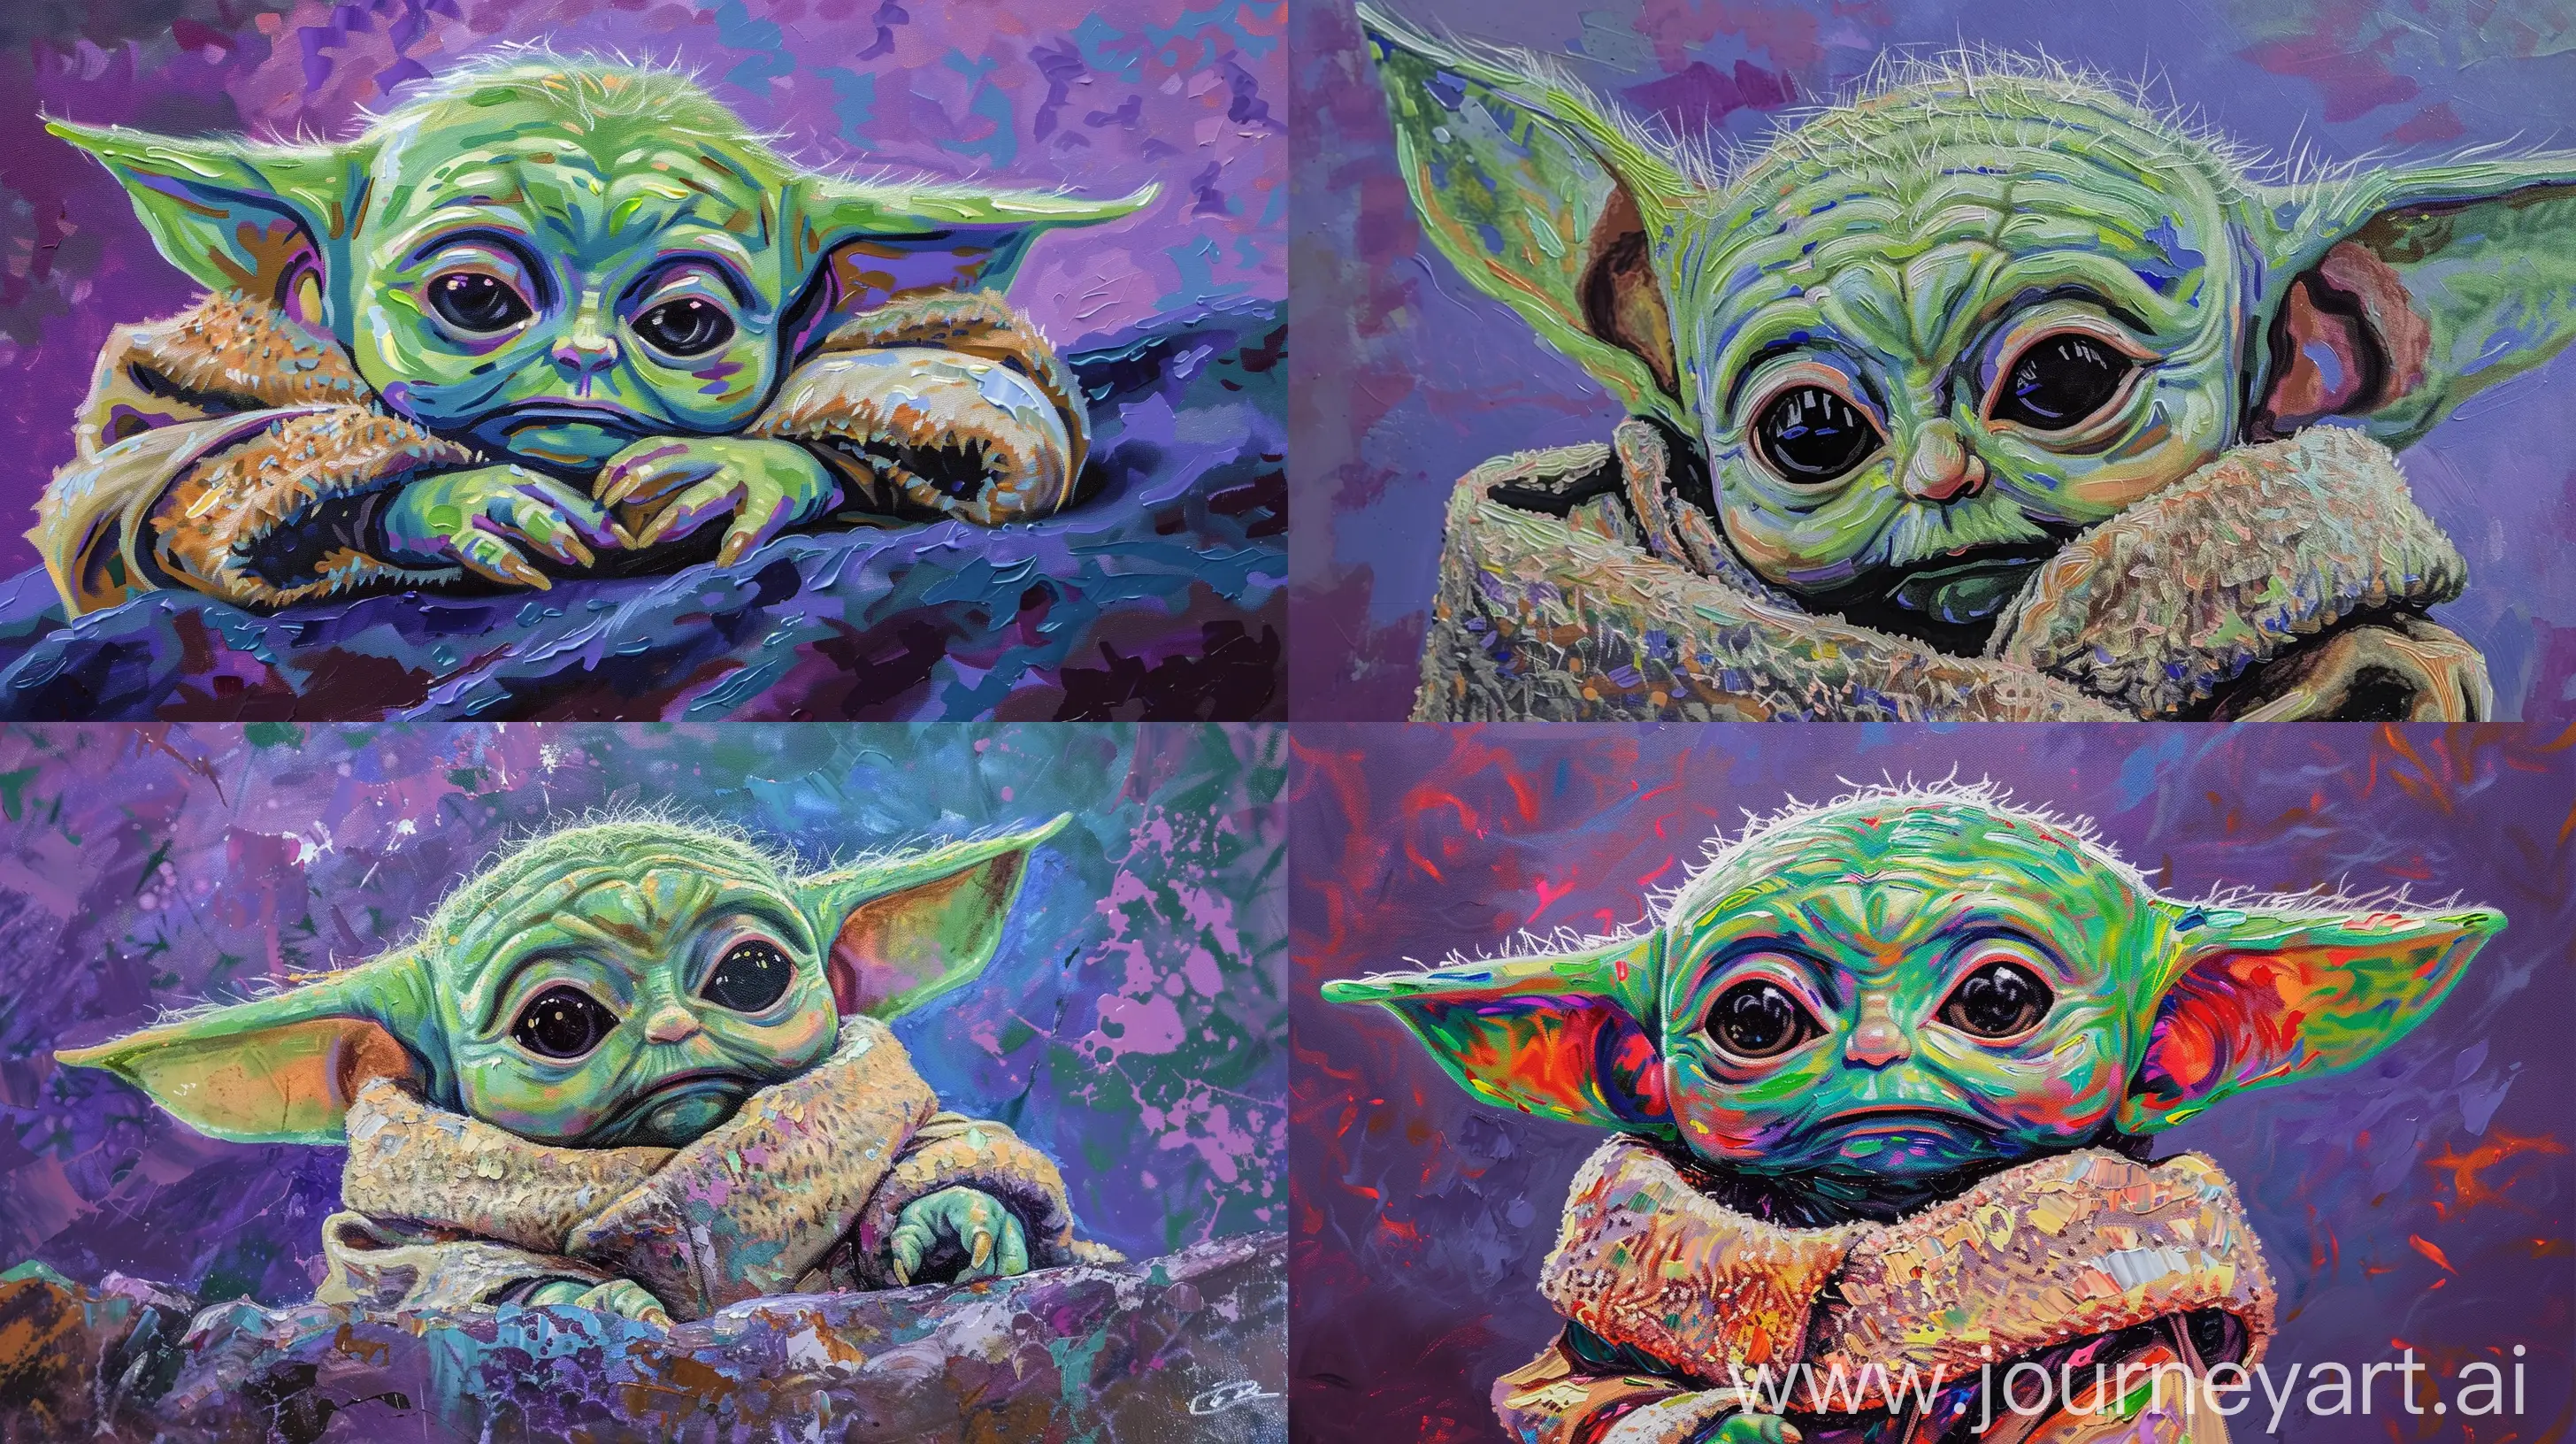 Adorable-Baby-Yoda-Oil-Painting-Van-Gogh-Style-with-Soft-Pastel-Colors